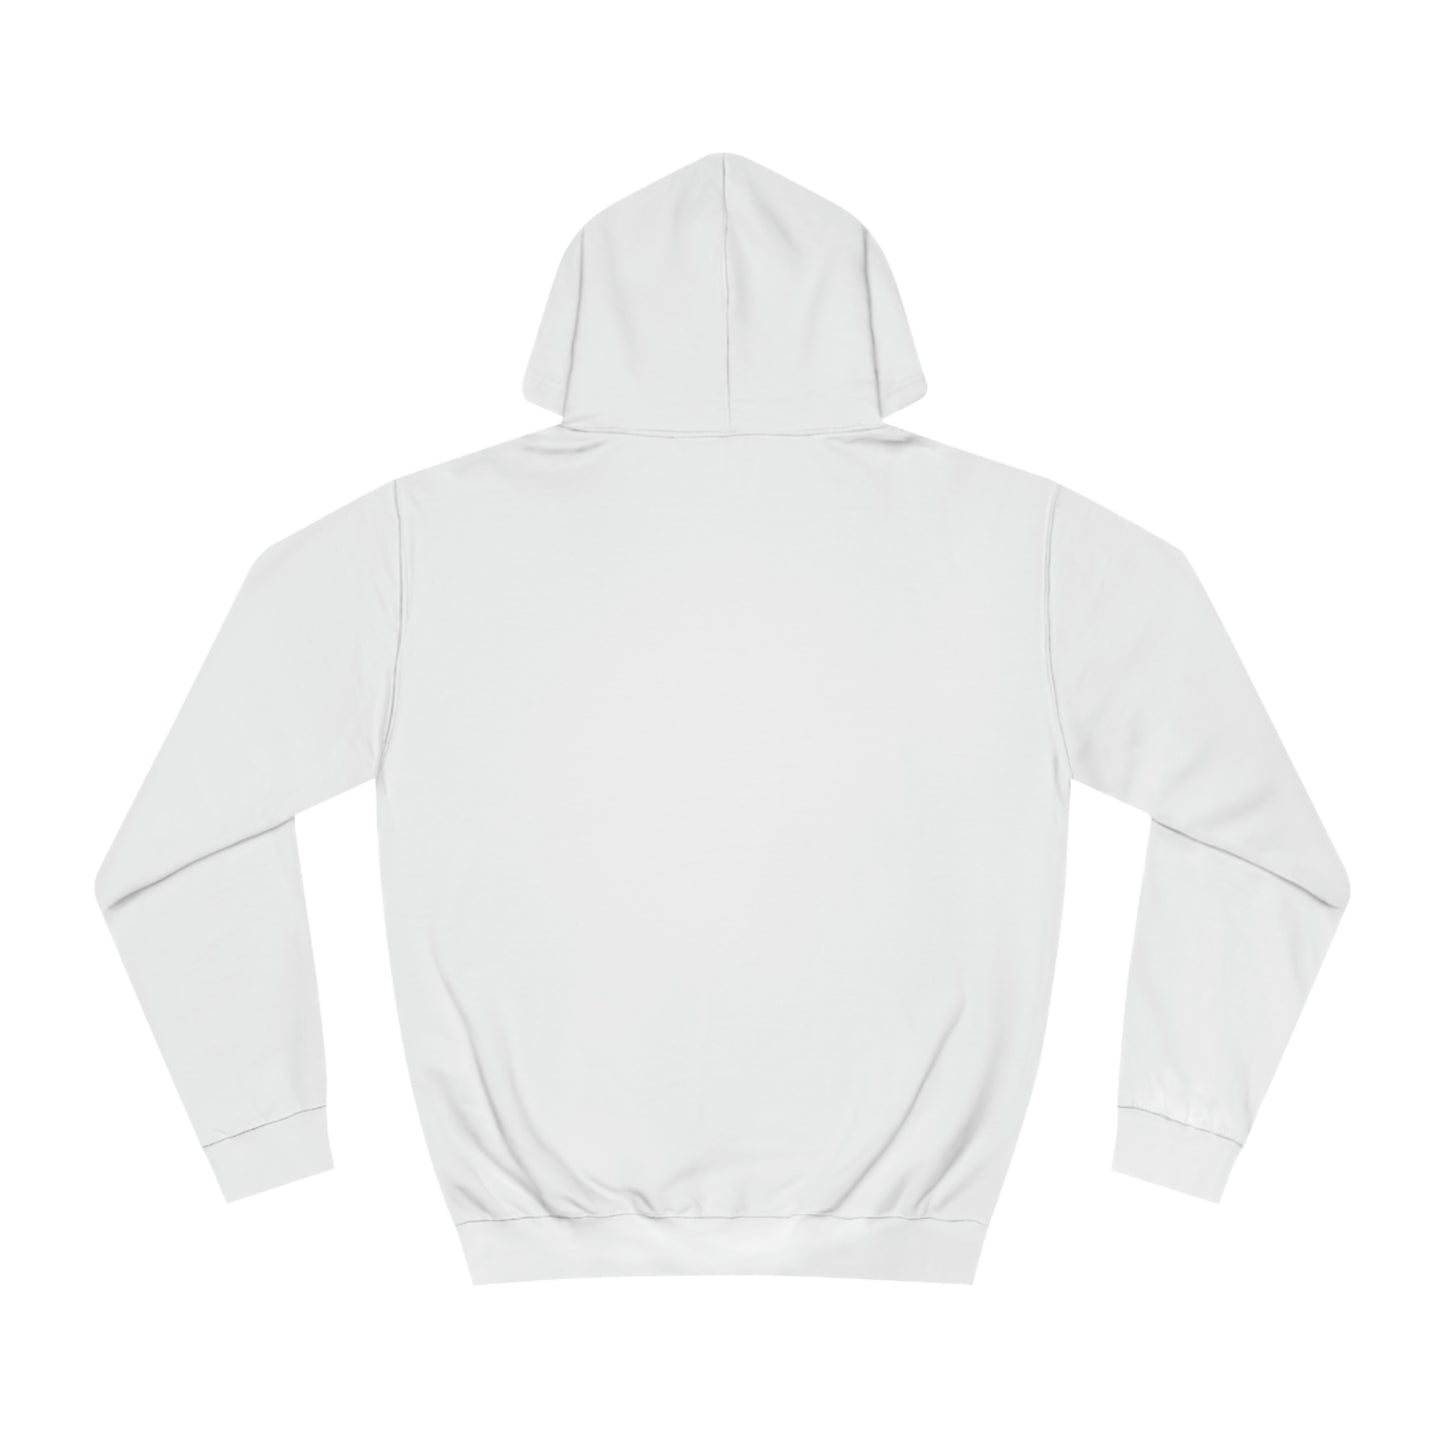 HMNS Podcast "State" Hoodie